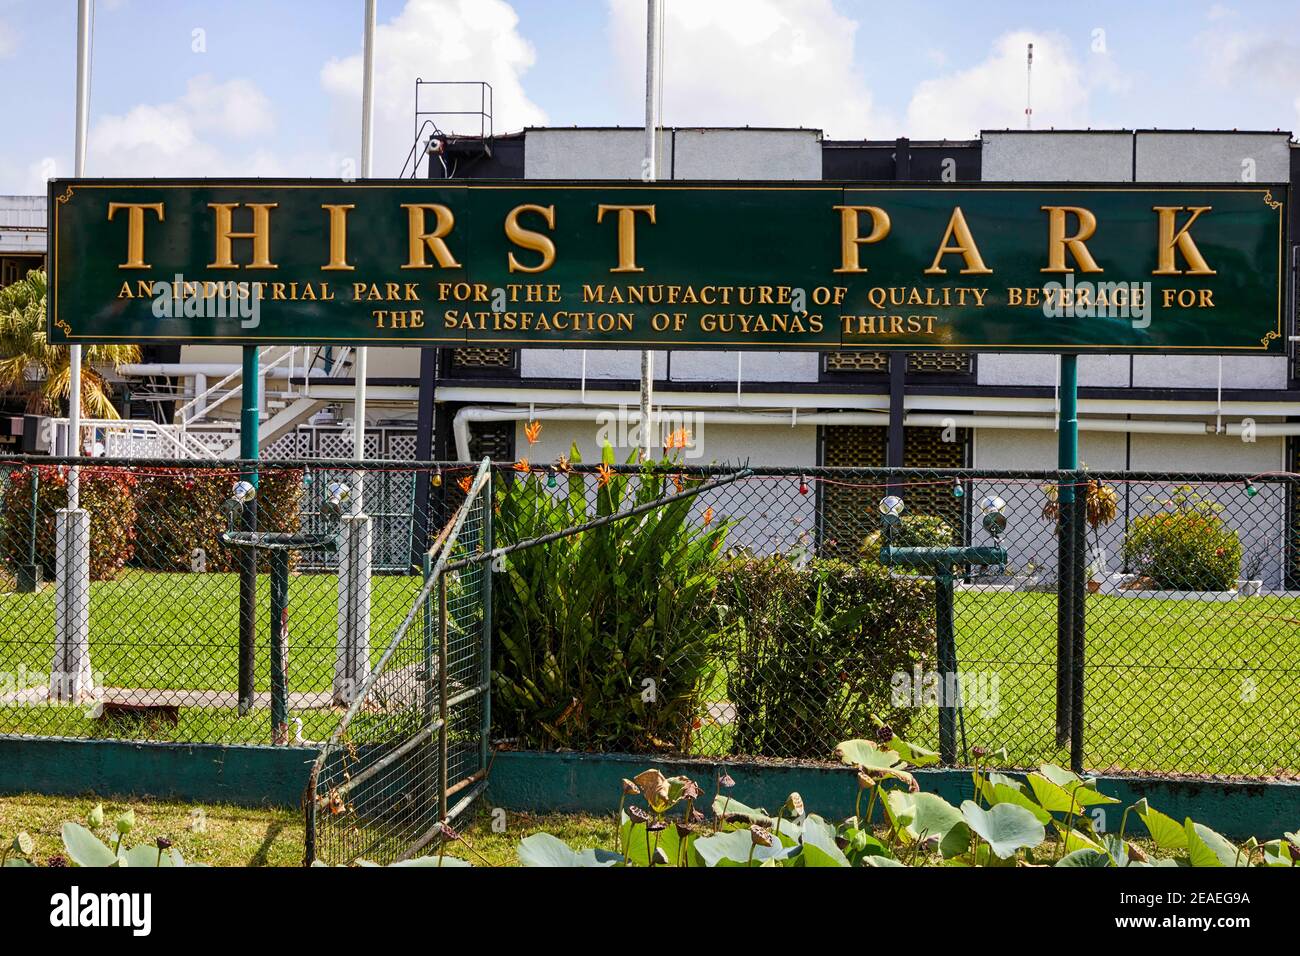 Thirst Park, Banks DIH Limited à Georgetown, Banks Beer Producation Facility, Guyana Banque D'Images